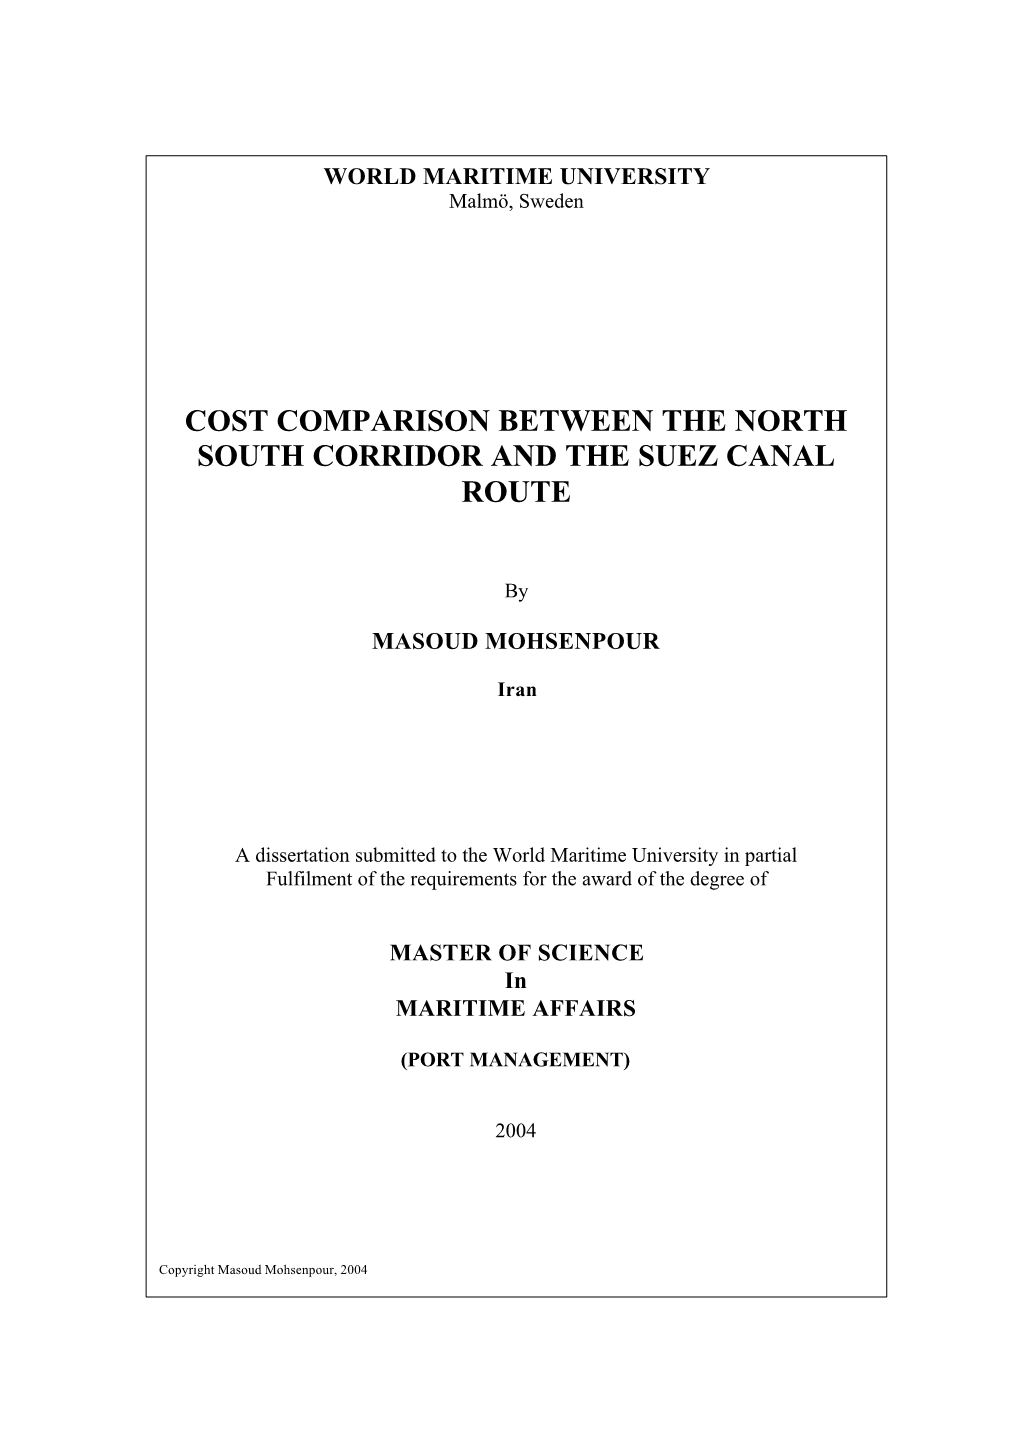 Cost Comparison Between the North-South Corridor and the Suez Canal Route